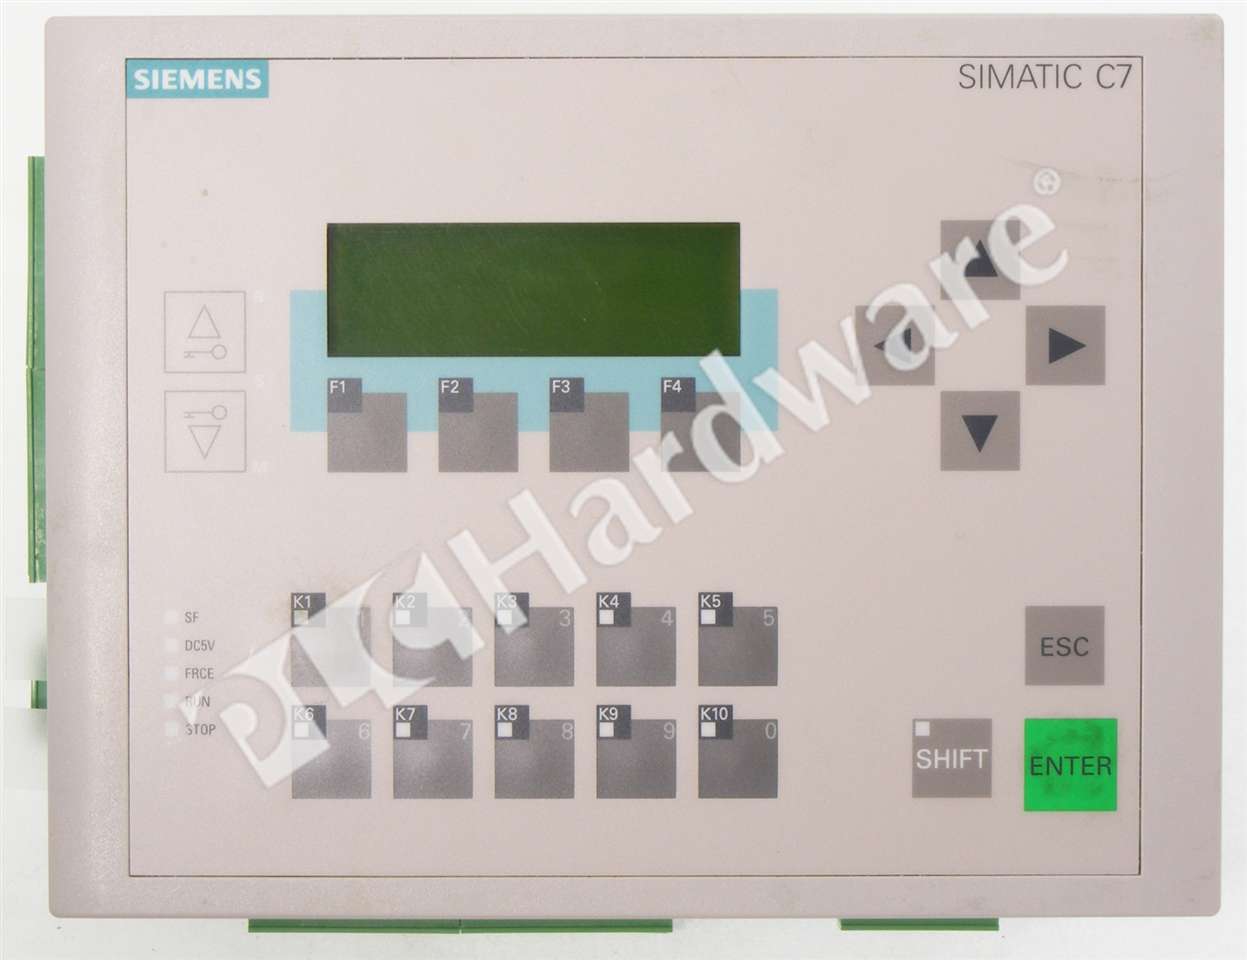 Details about   6ES7 613-1CA02-0AE3 Membrane Keypad Switch for 6ES7613-1CA02-0AE3 C7-613 GEA 